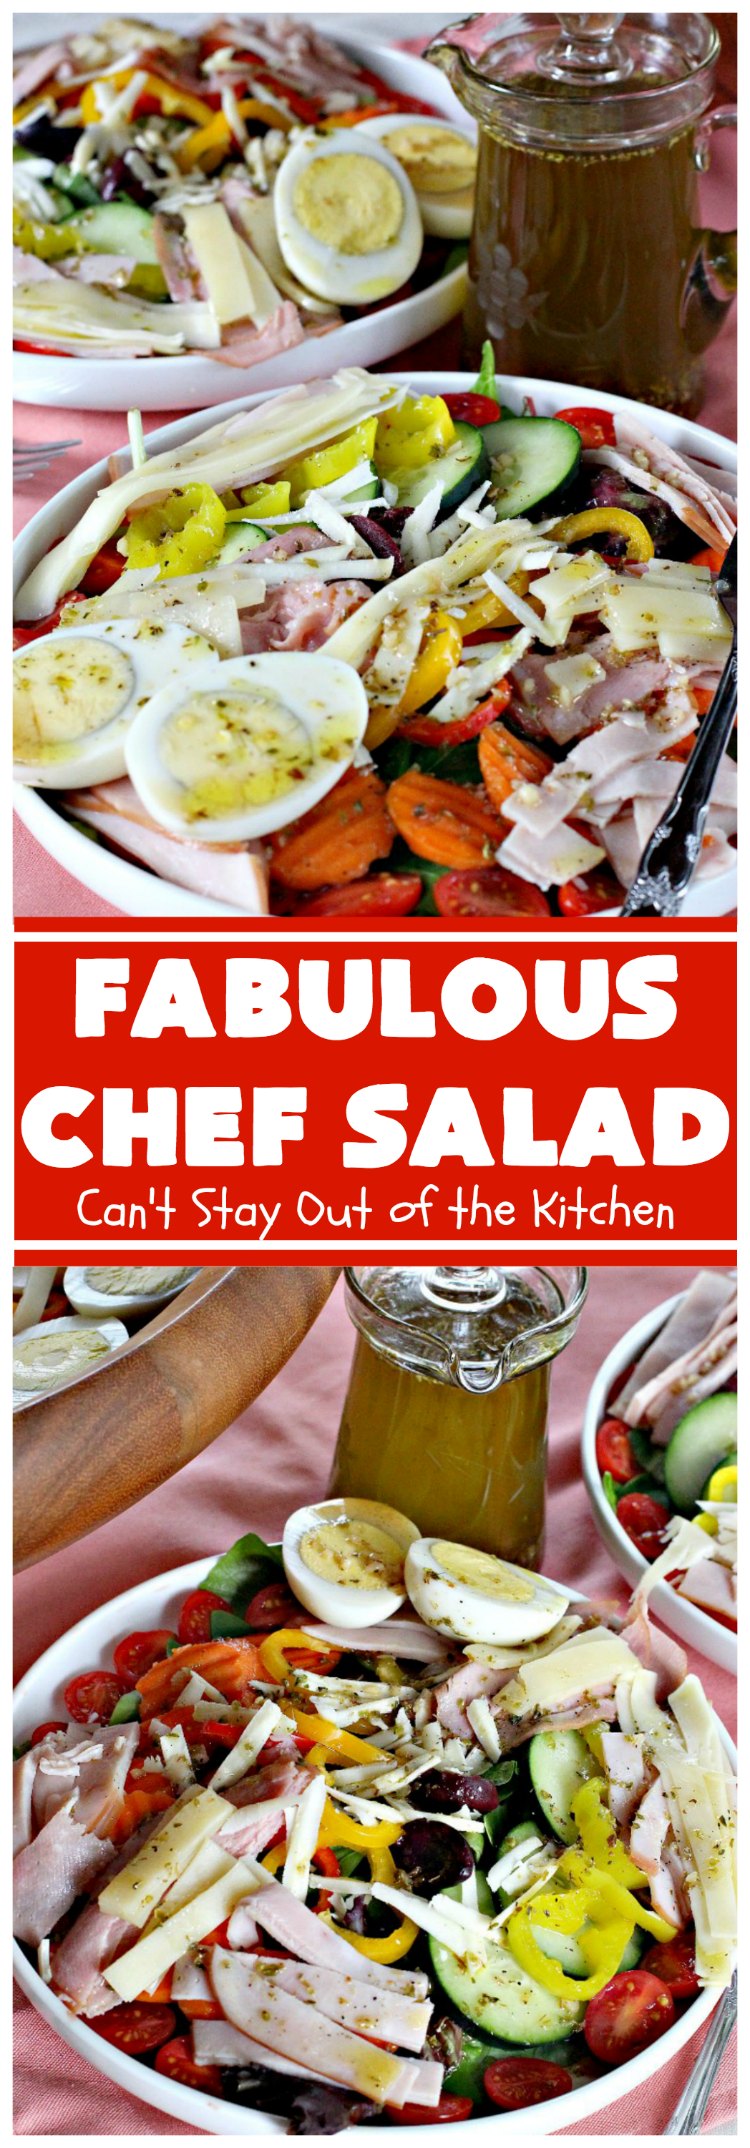 Fabulous Chef Salad | Can't Stay Out of the Kitchen